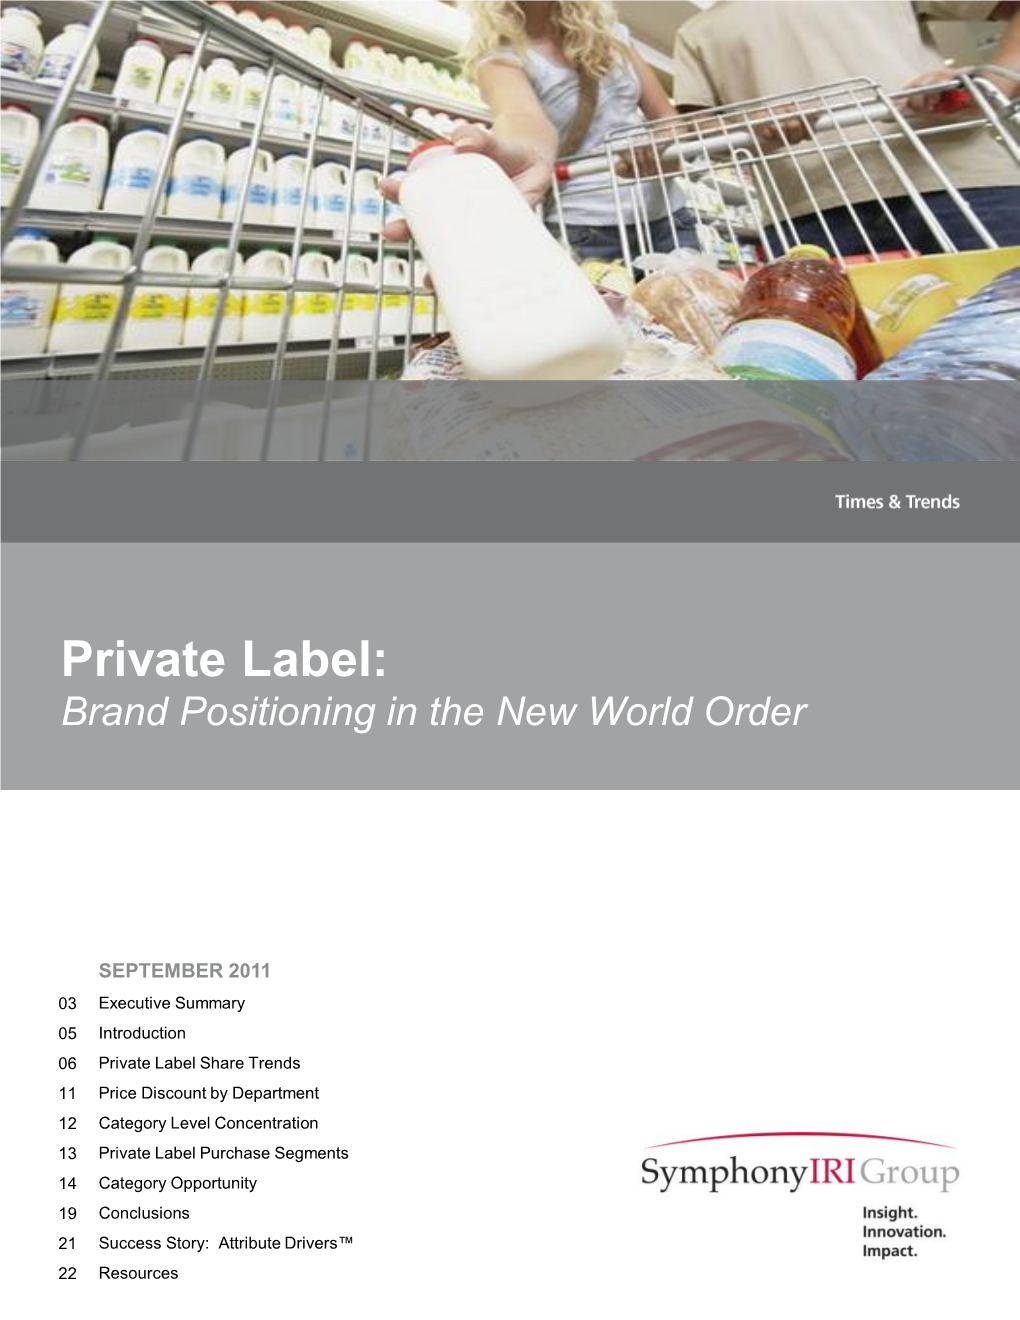 Private Label: Brand Positioning in the New World Order